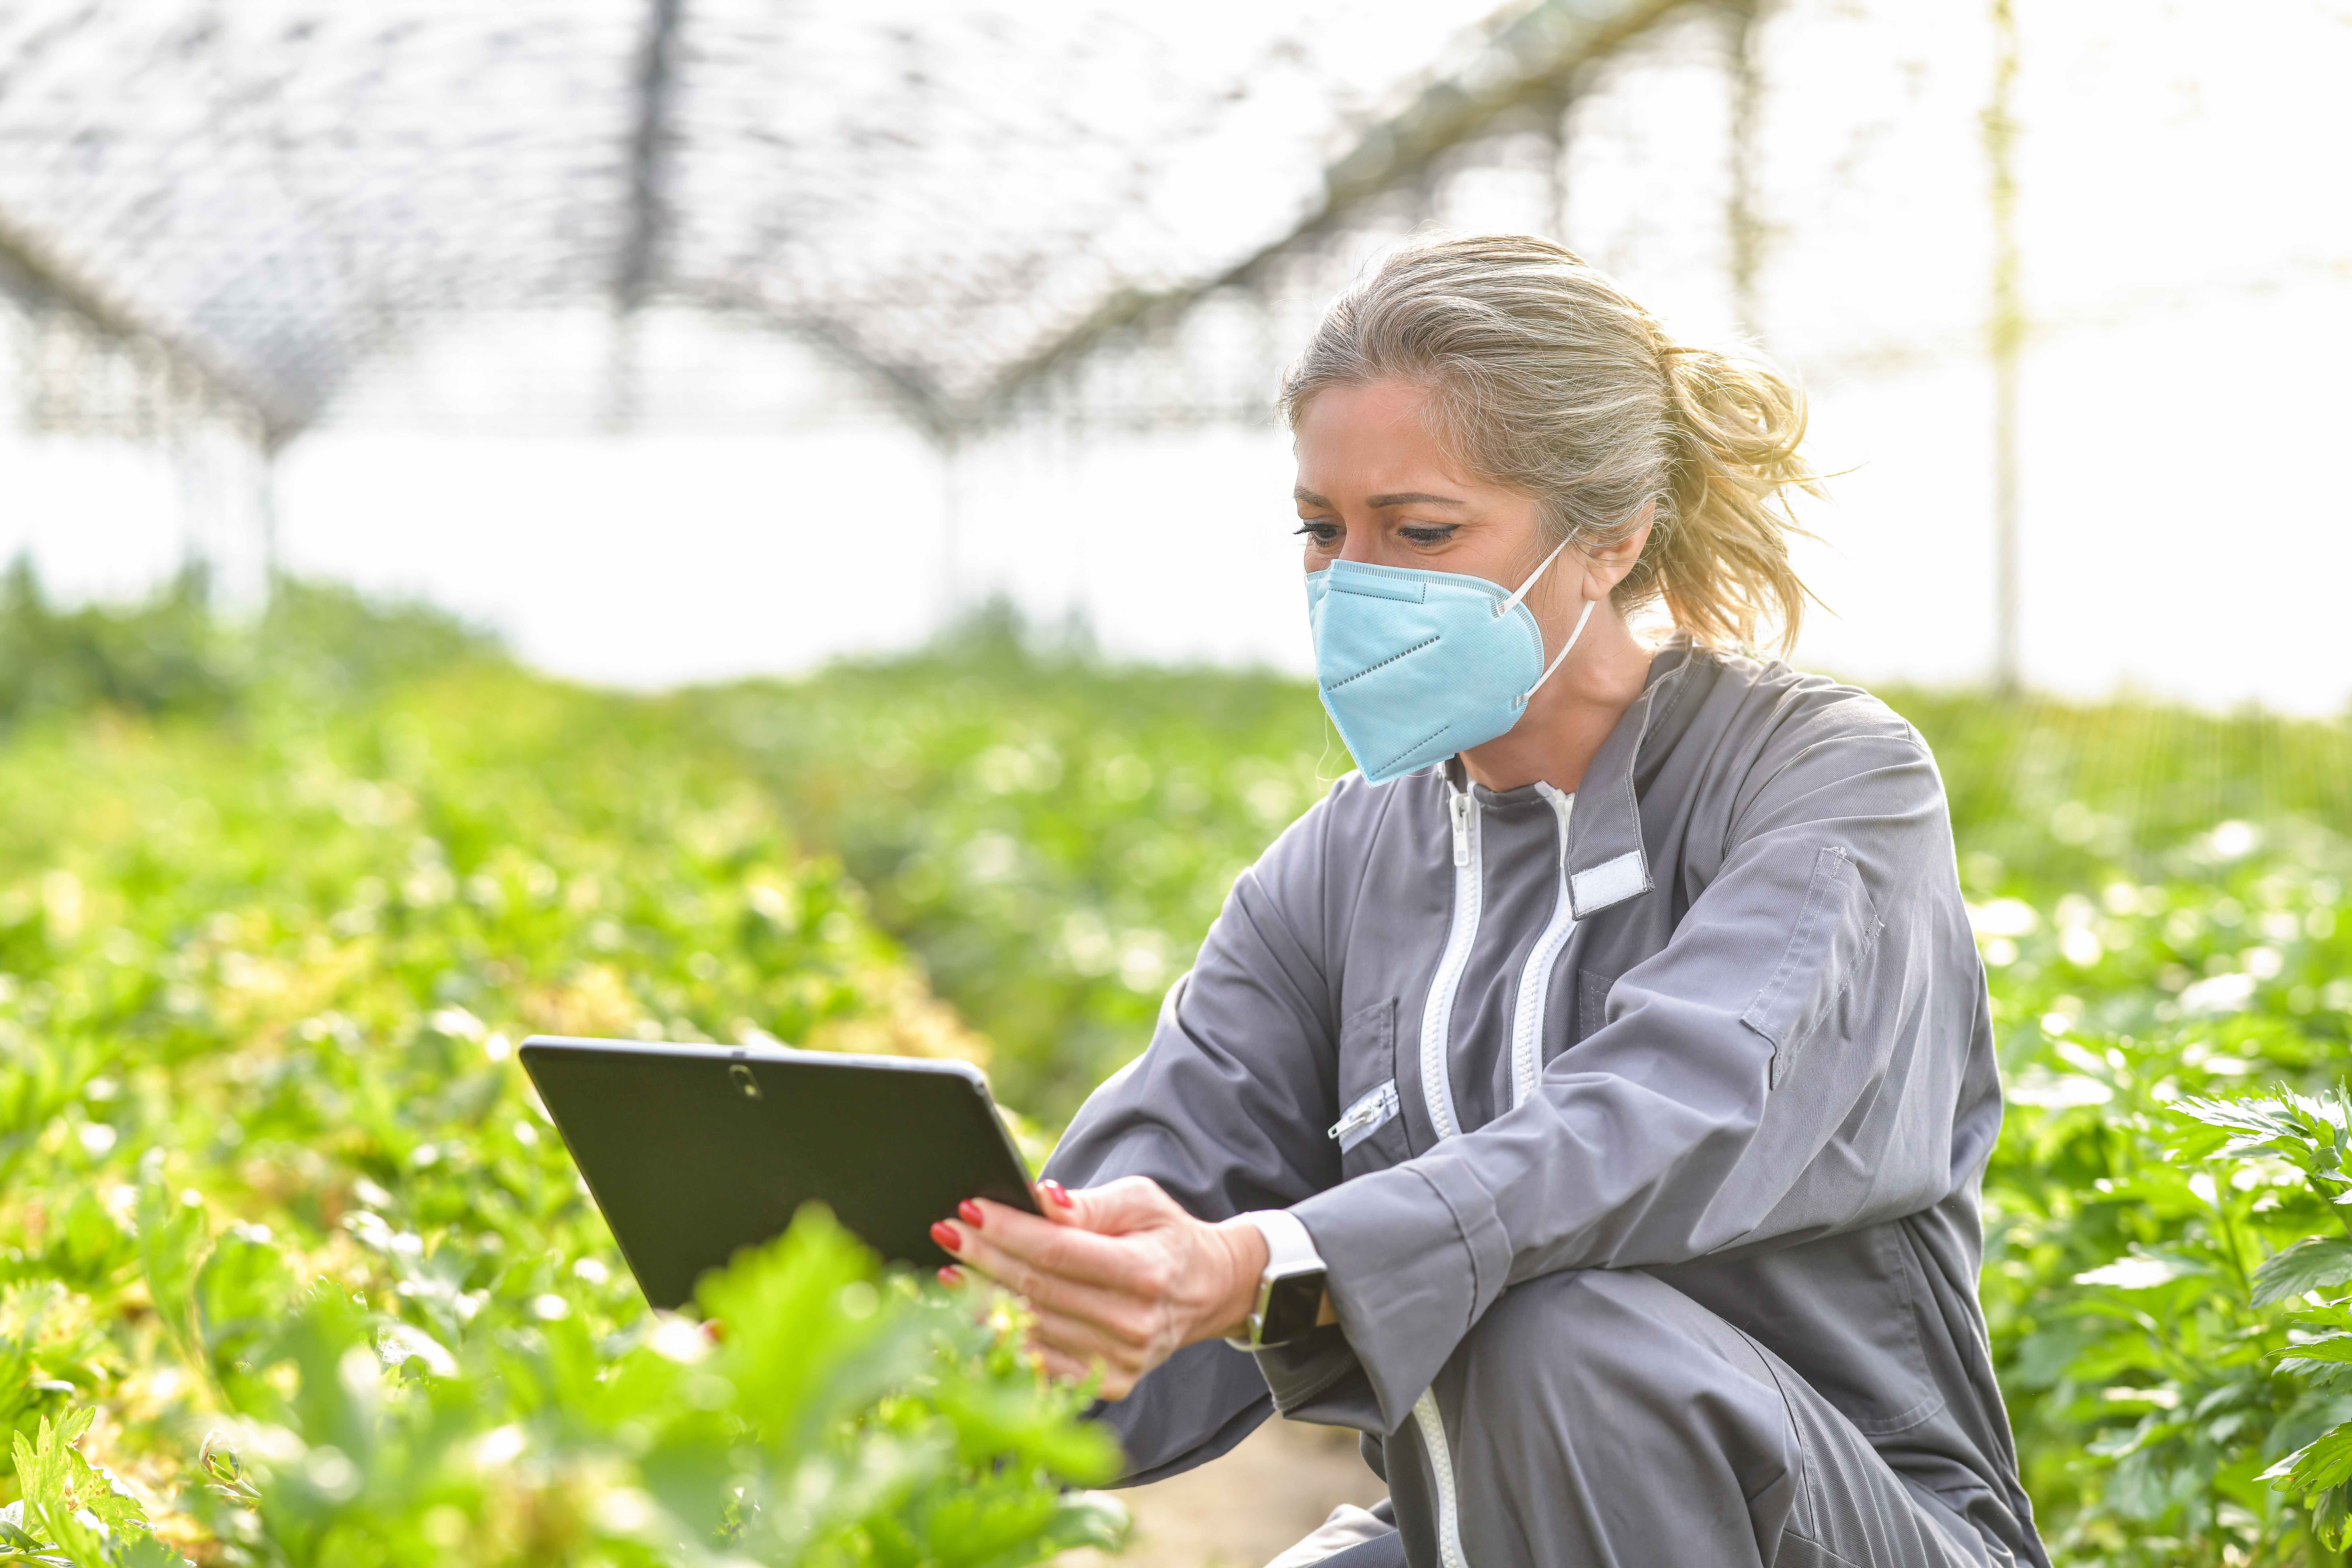 Farmer with Ipad in a greenhouse wearing a mask